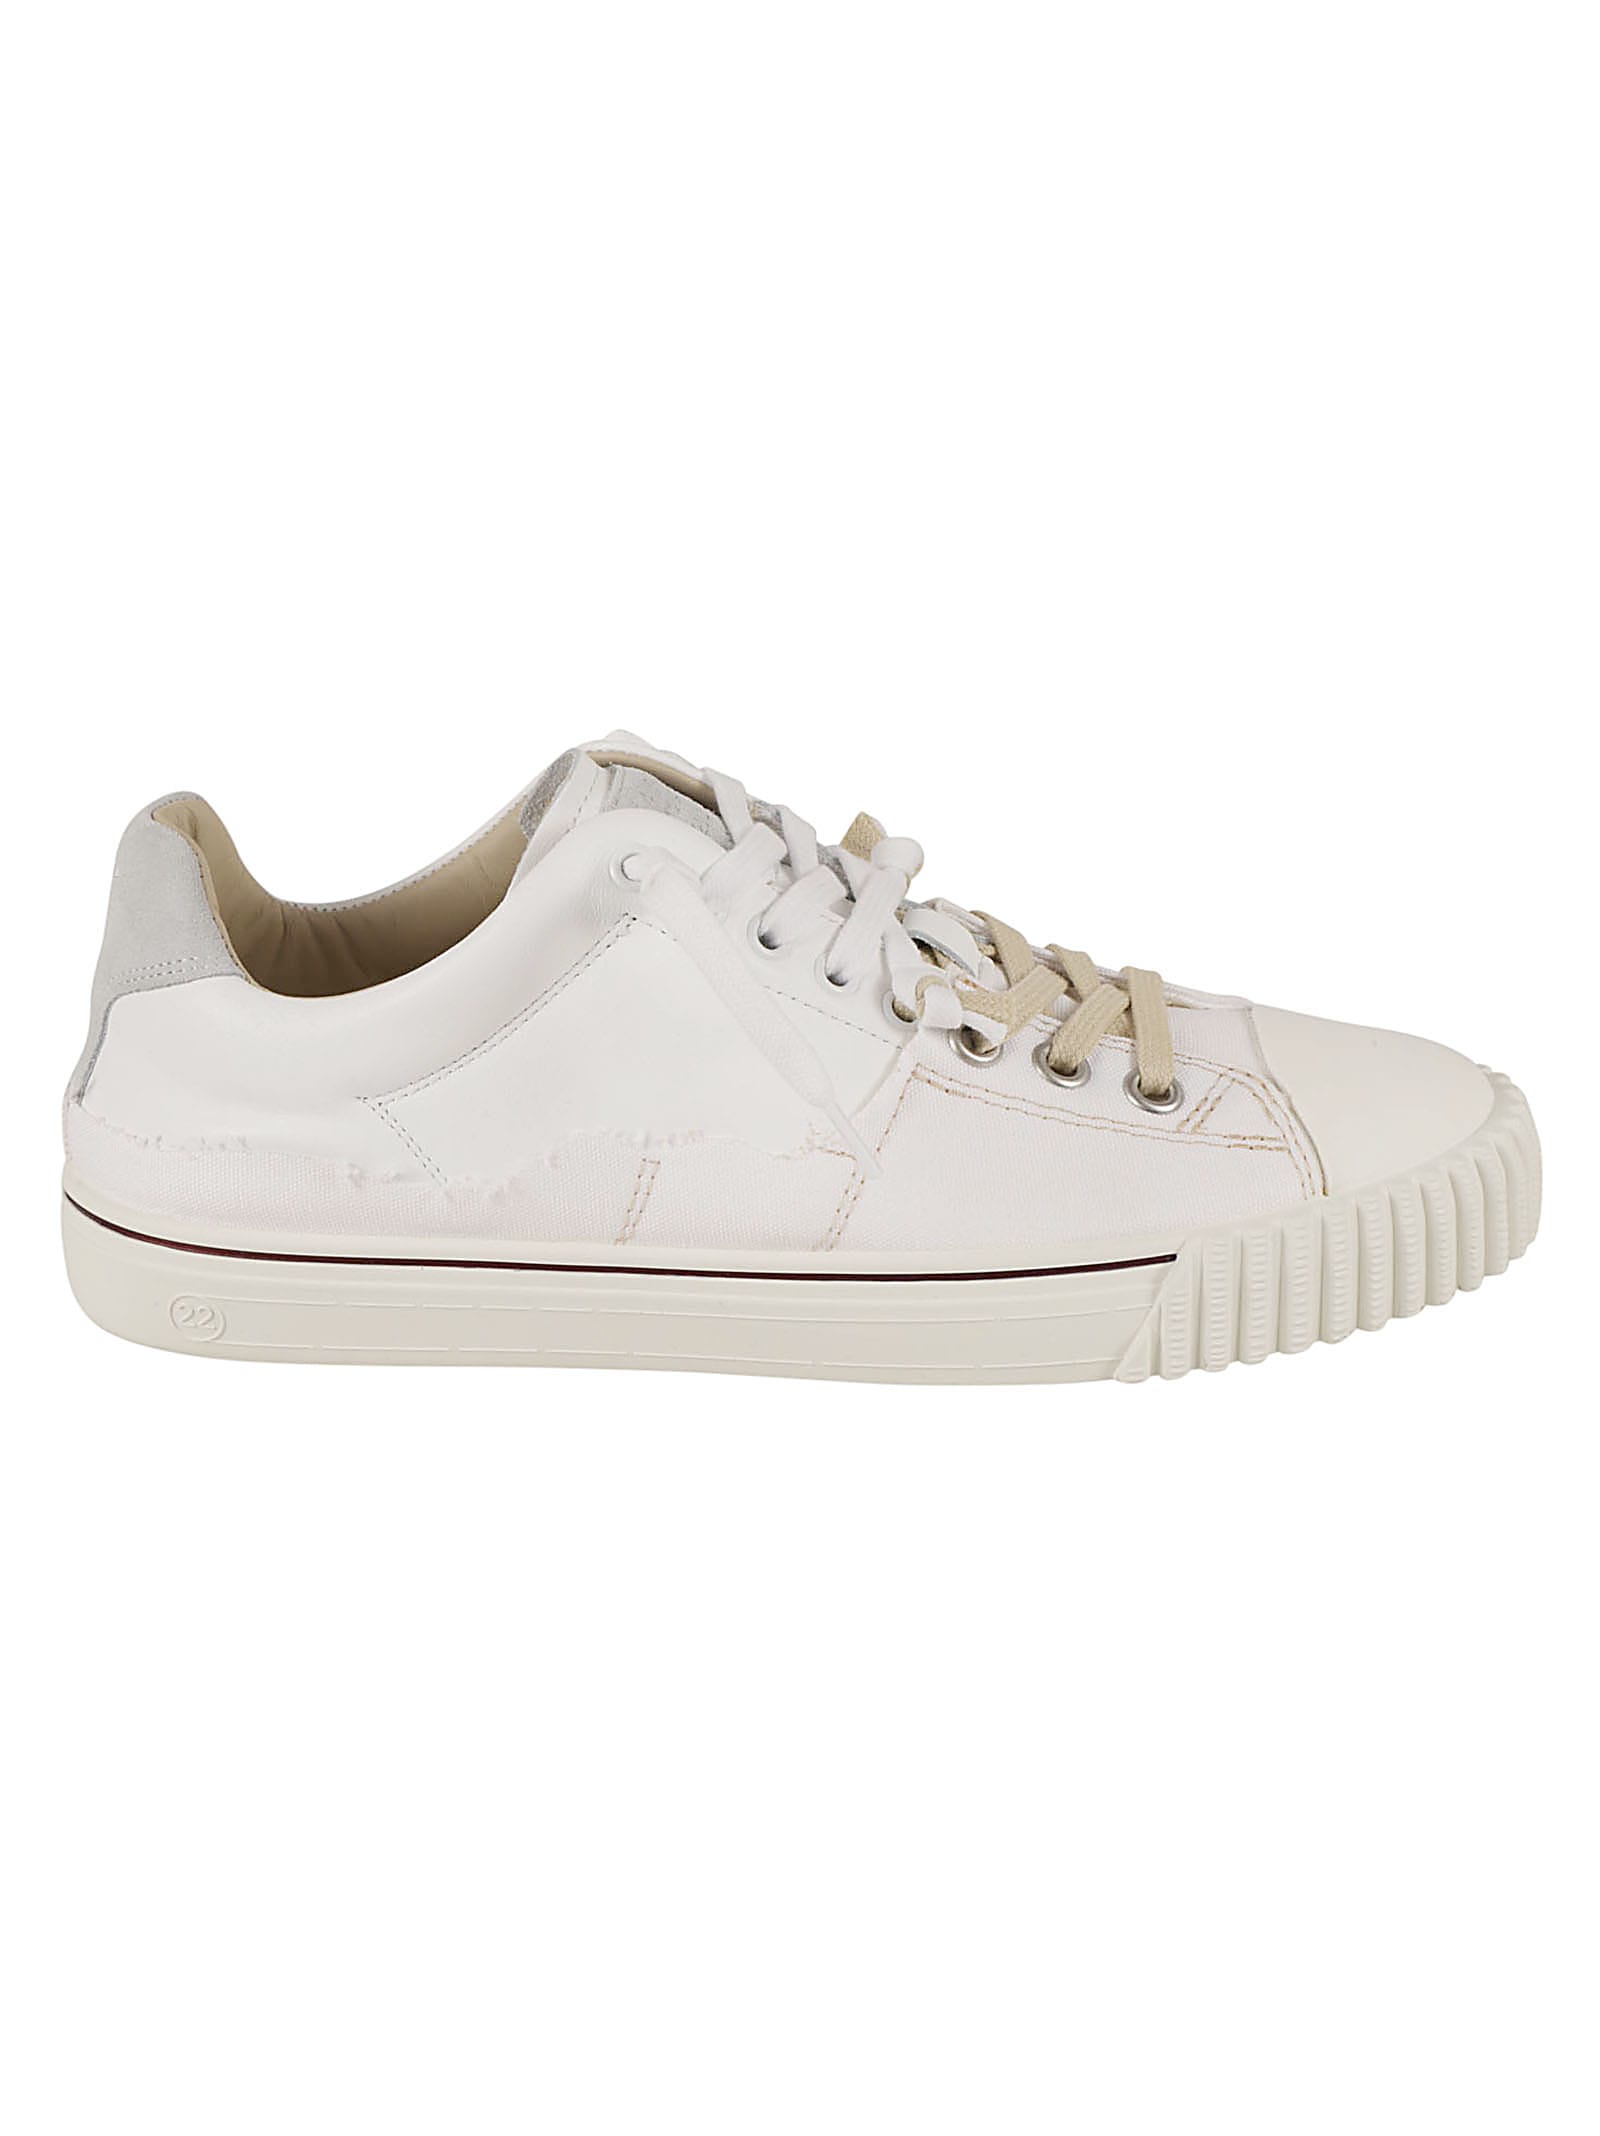 Maison Margiela Evolution Low Sneakers In Off-white